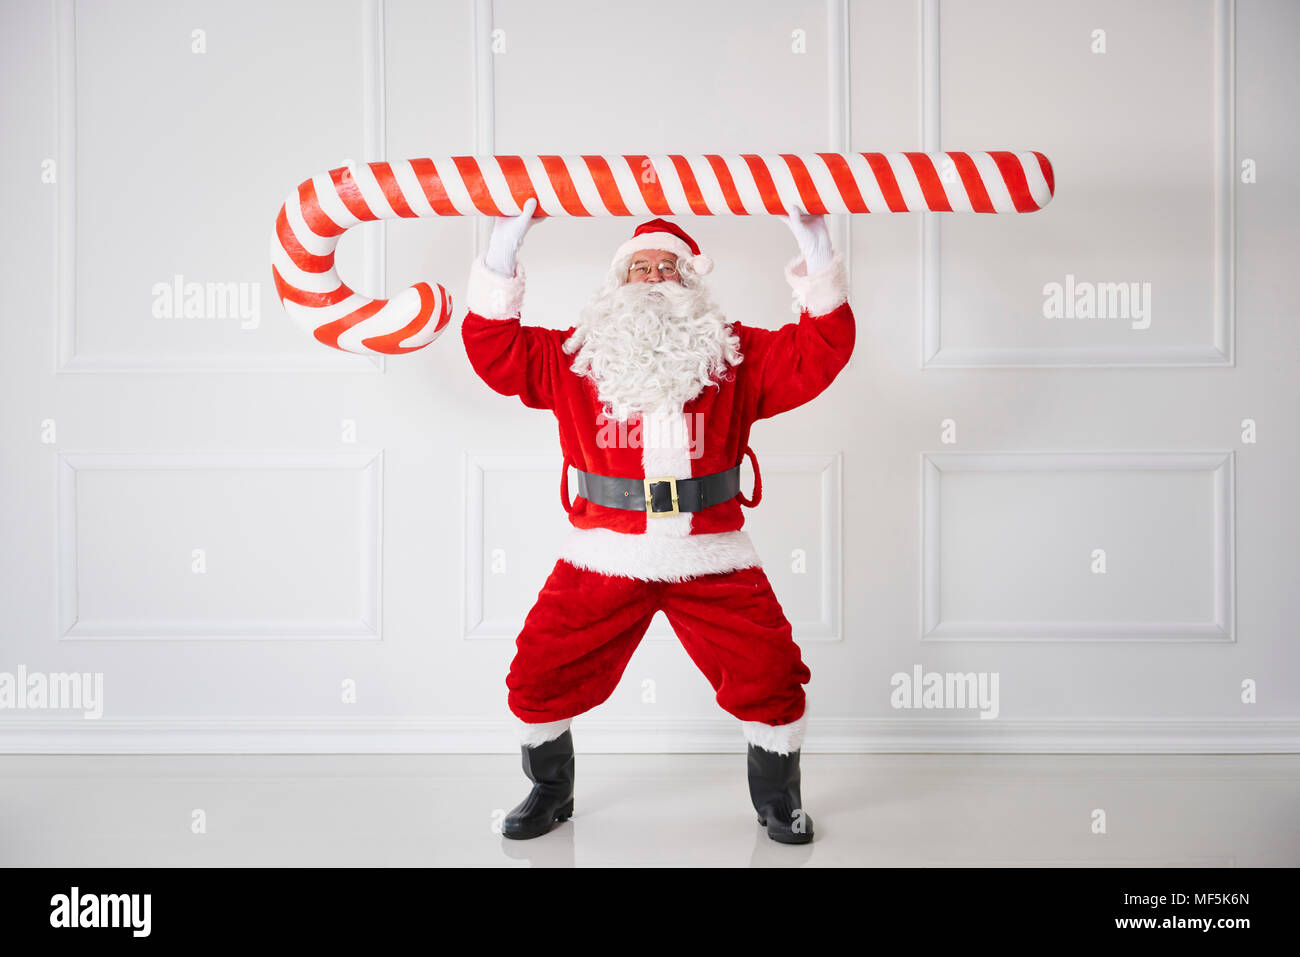 Santa Claus with oversized candy cane Stock Photo